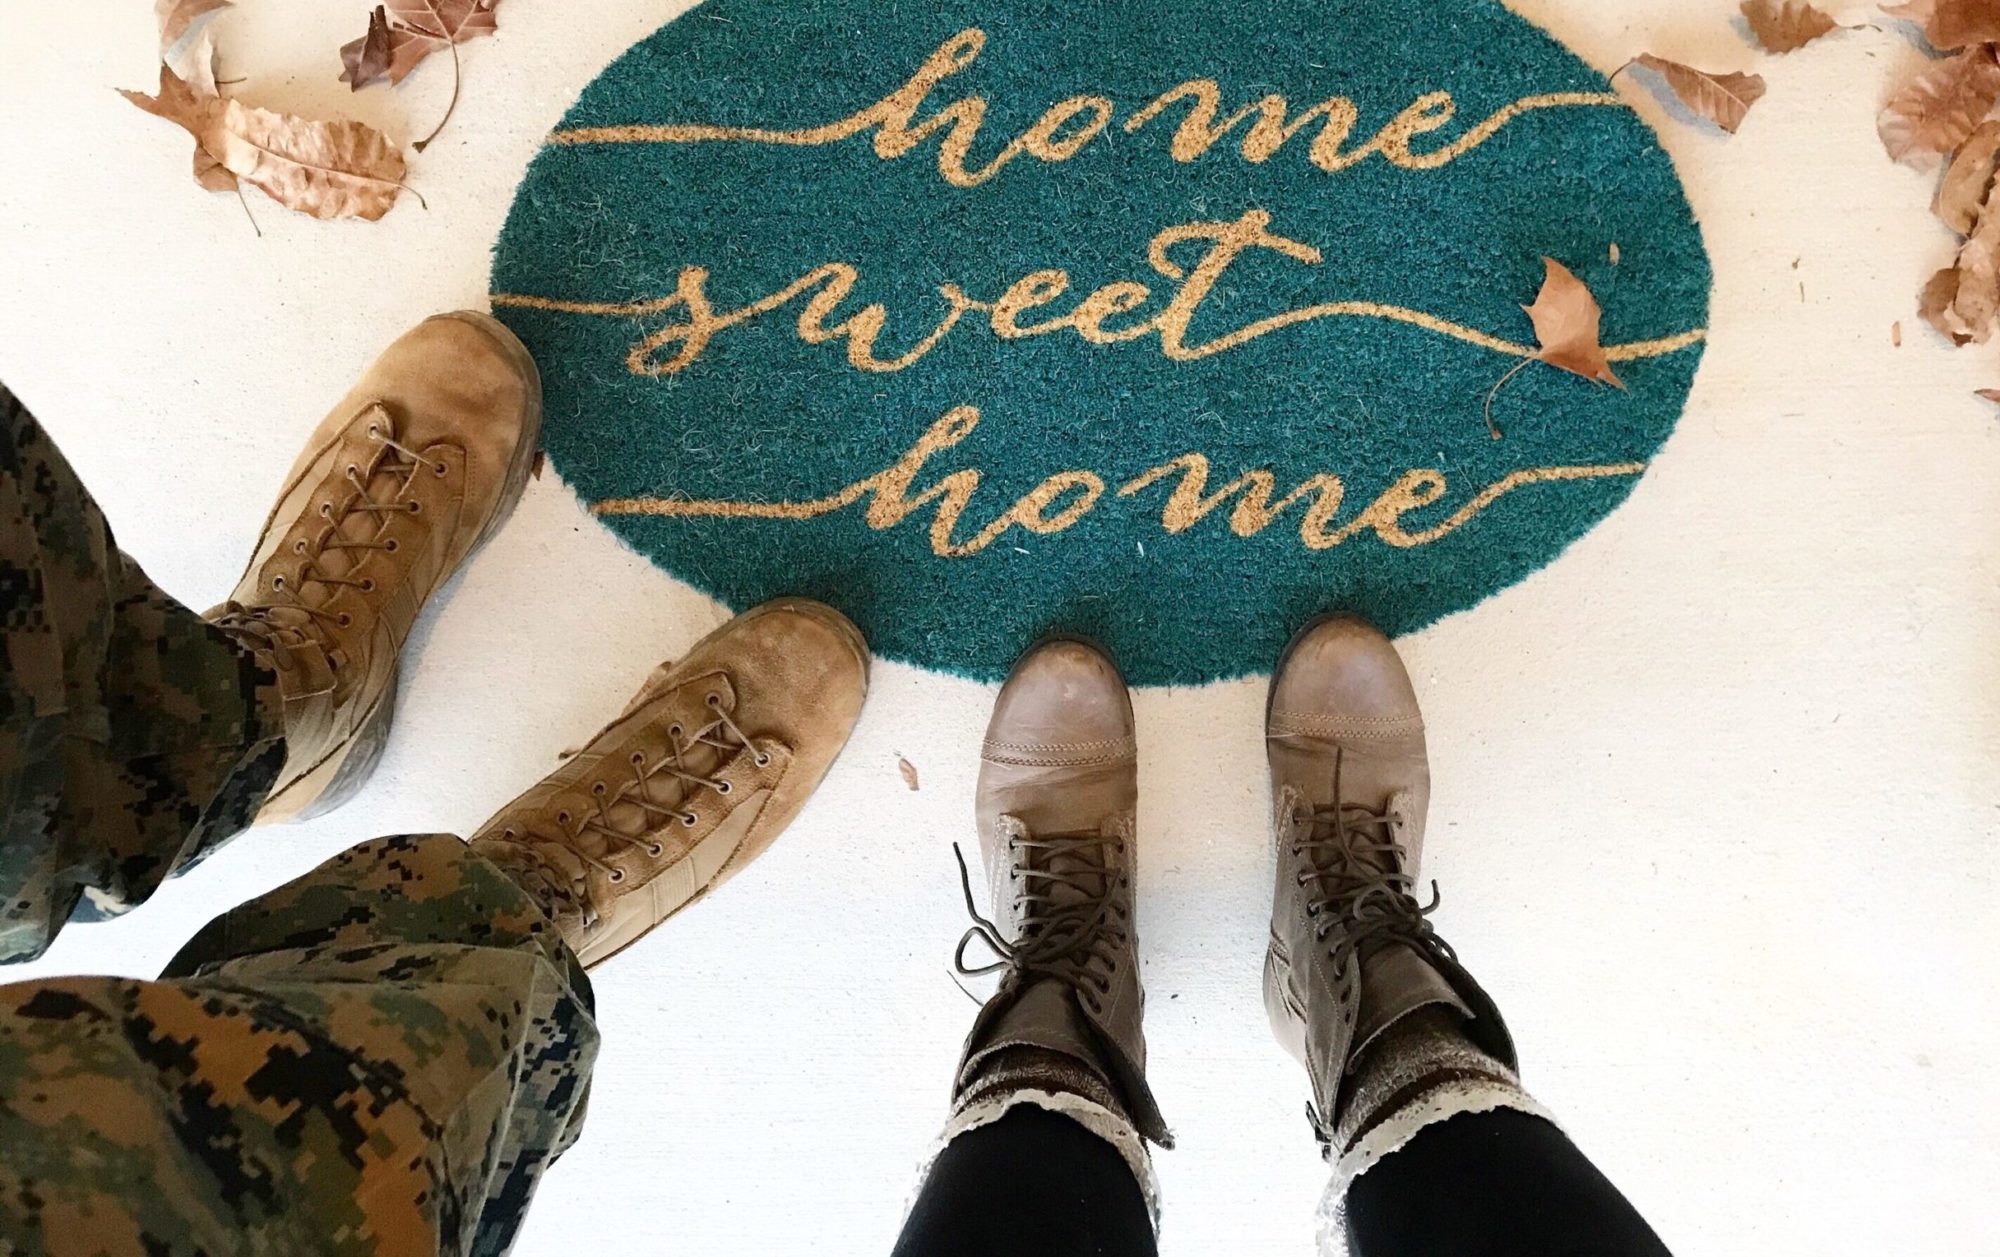 Home-sweet-home-sign-next-to-person-wearing-military-combat-boots-and-another-person-wearing-laced-up-boots.